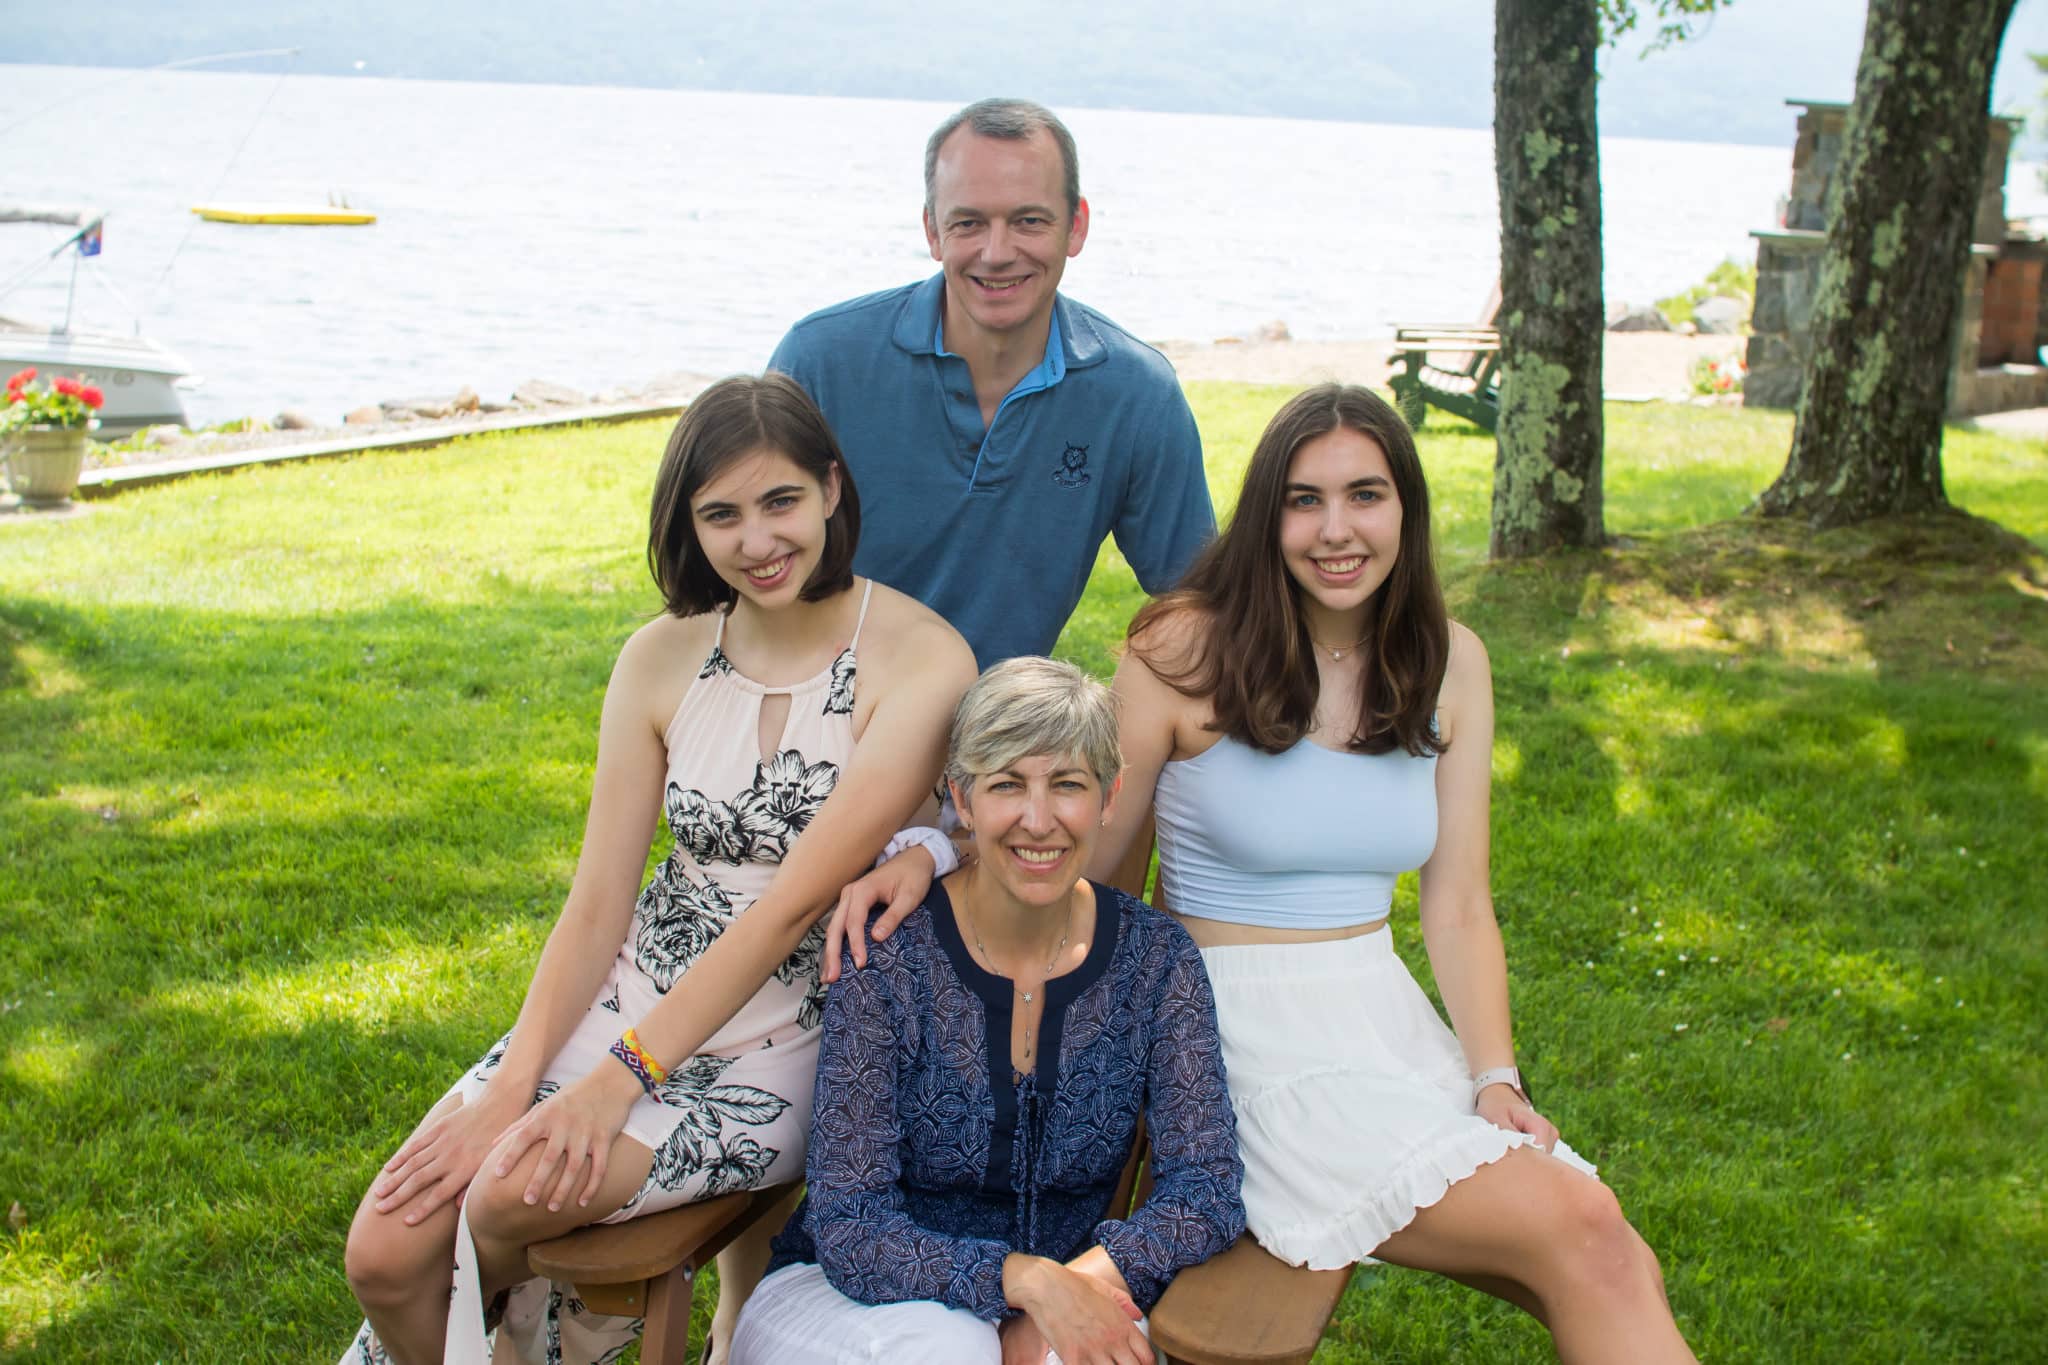 Lucinda Orsini, Vice President of Values and Outcomes Research at Compass, and her family